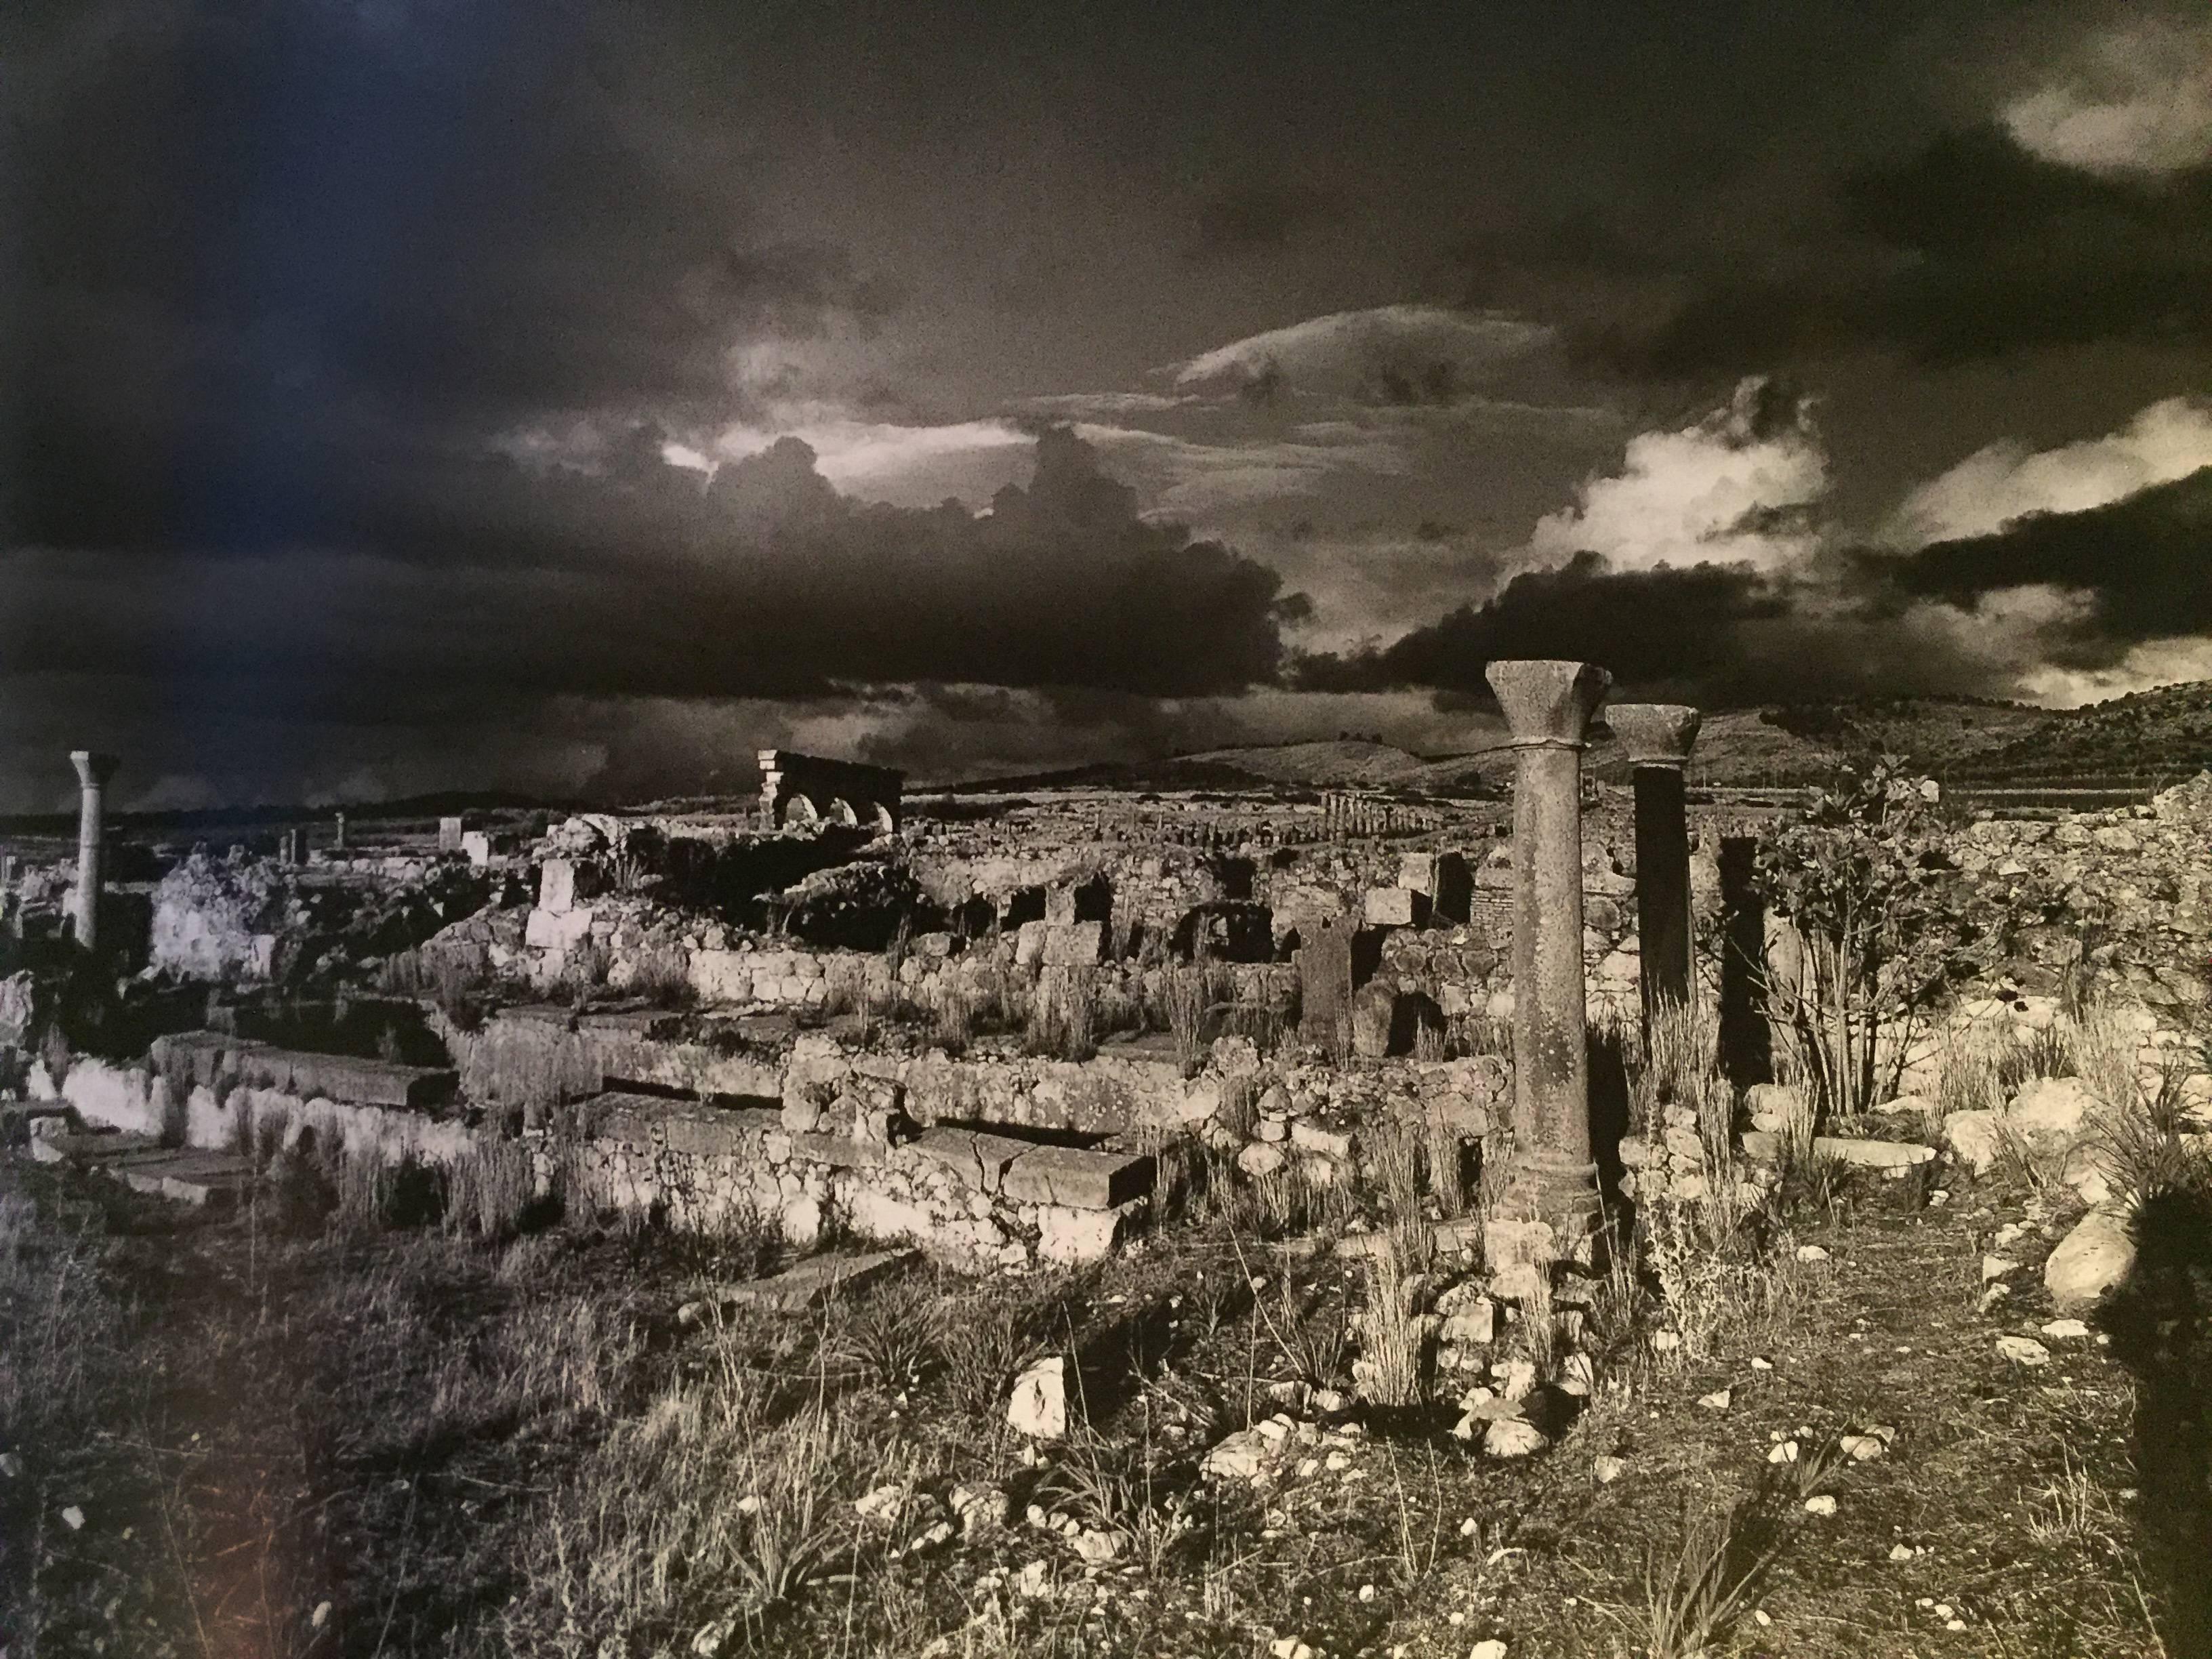 Don McCullin, Southern Frontiers, a Journey across the Roman Empire 'Signed' 2